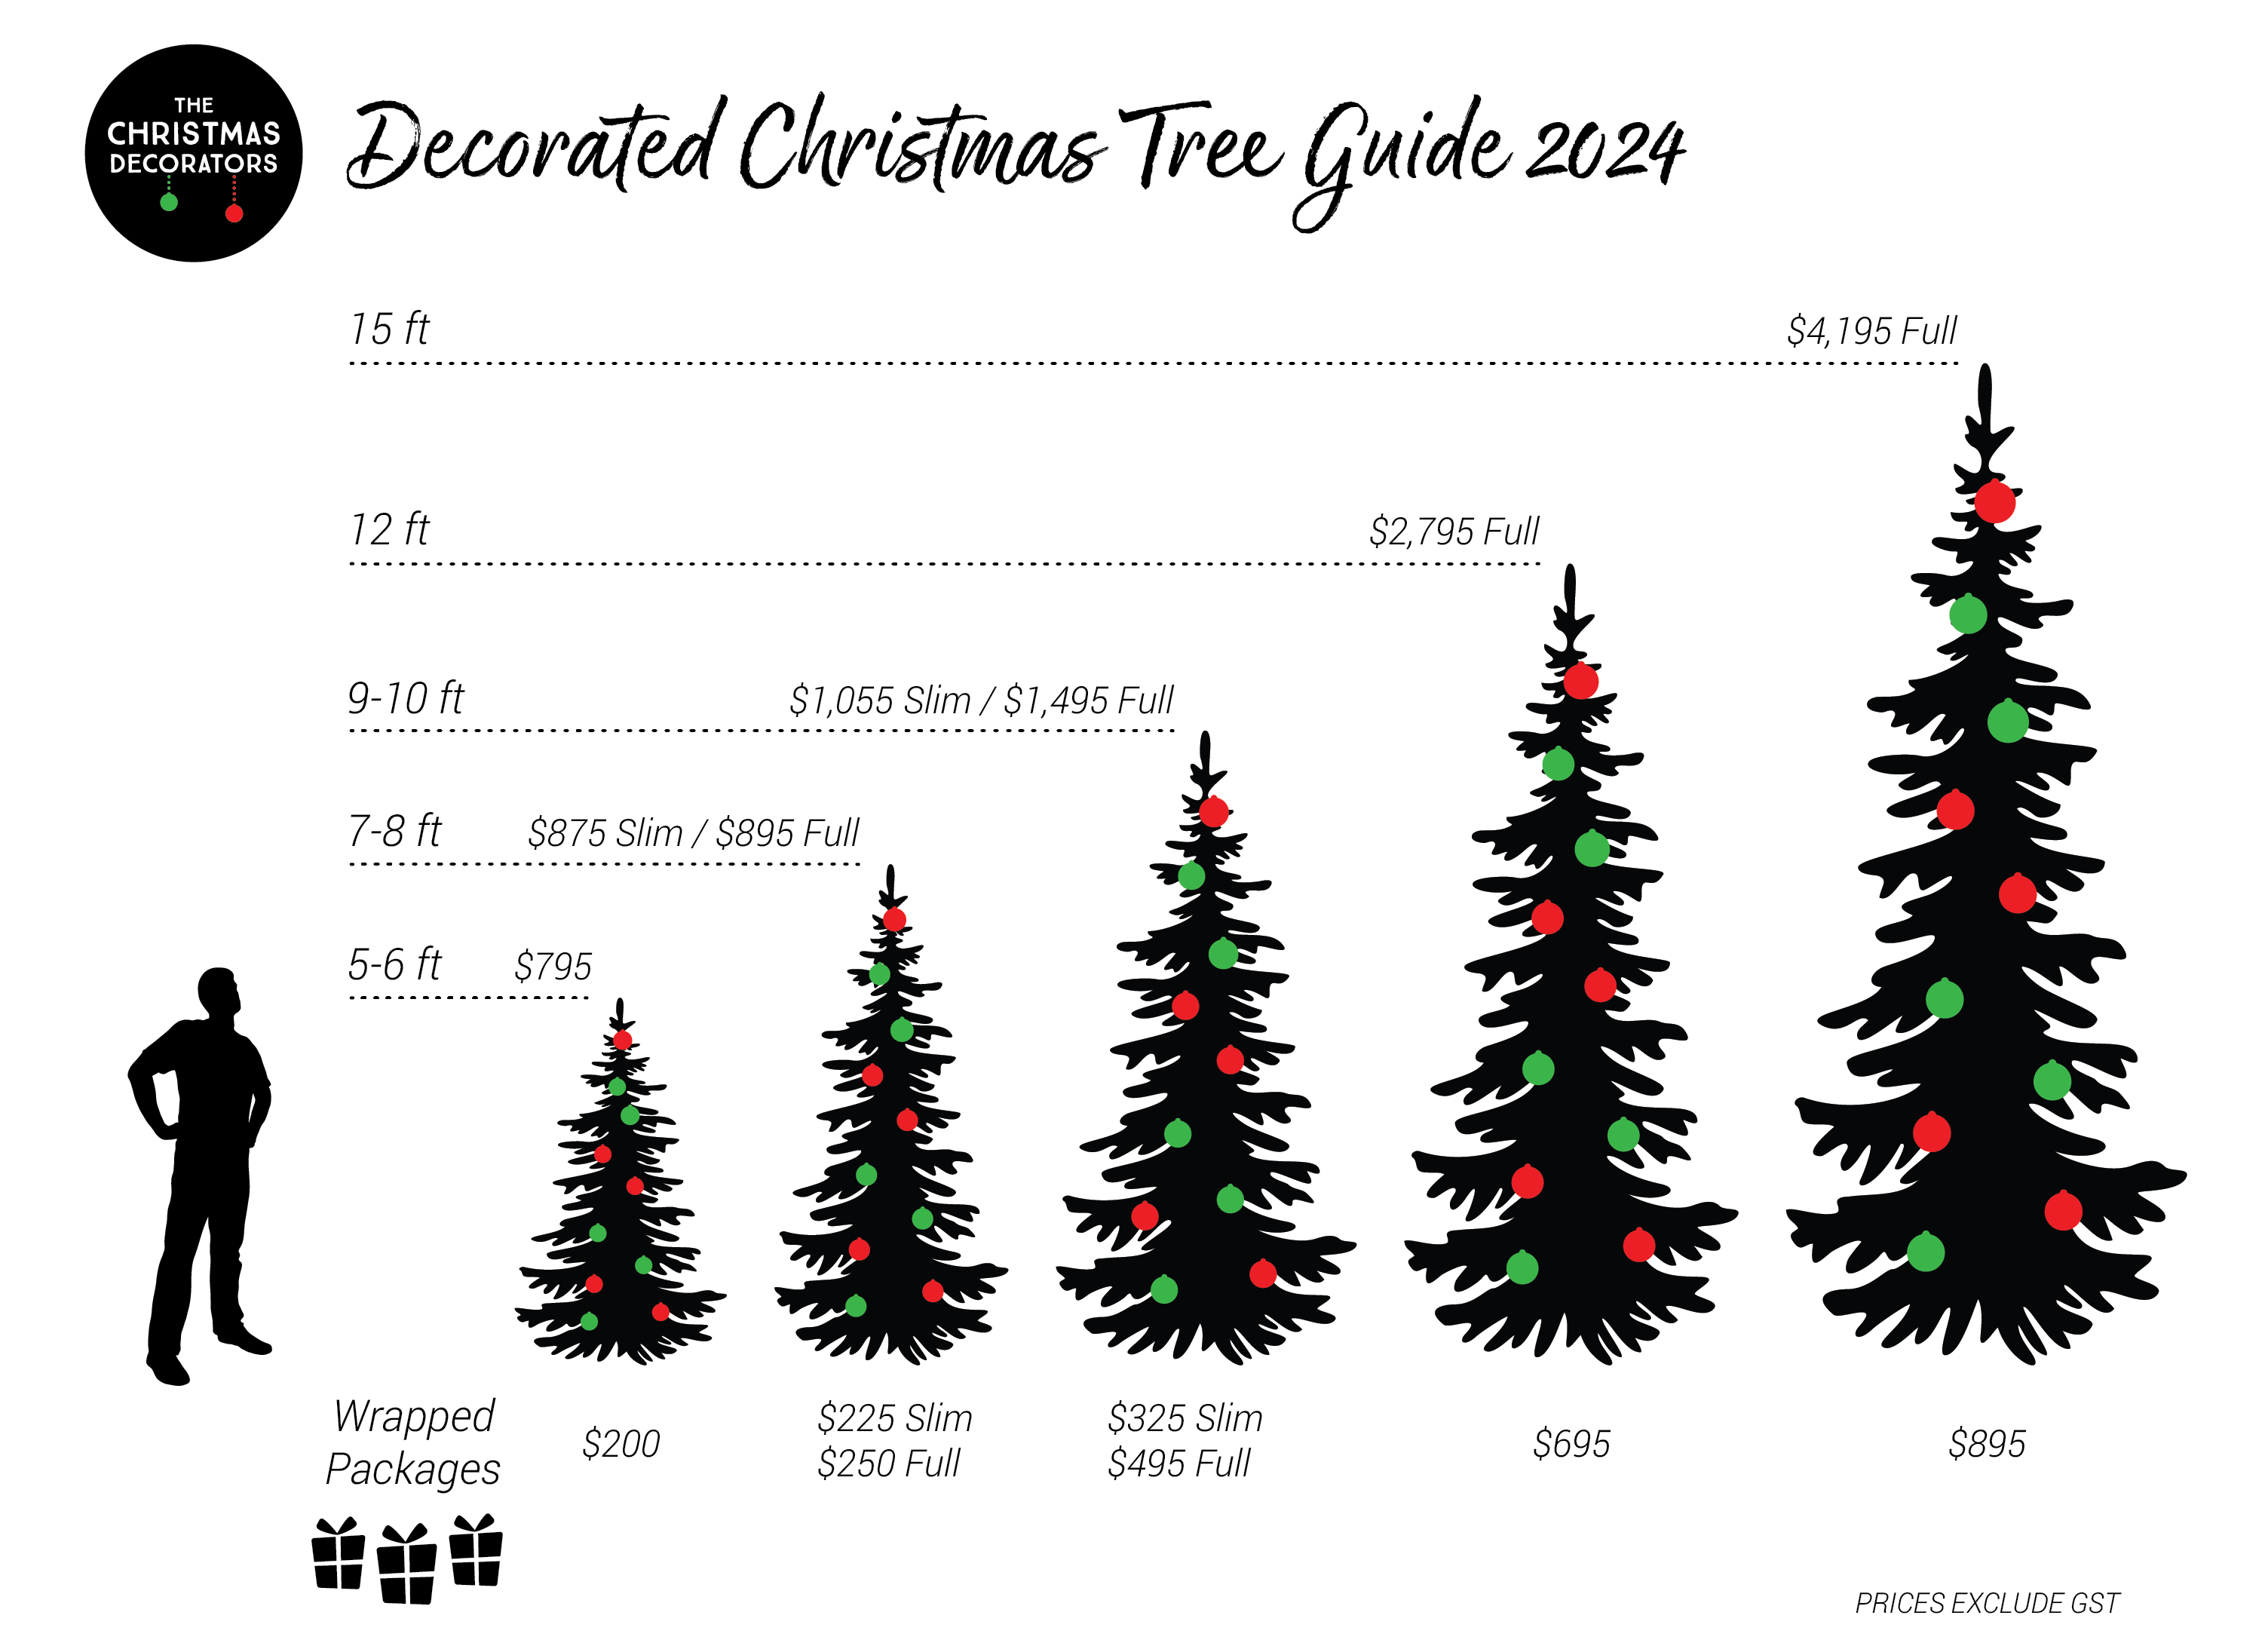 The Christmas Decorators Decorated Christmas Tree Guide 2024